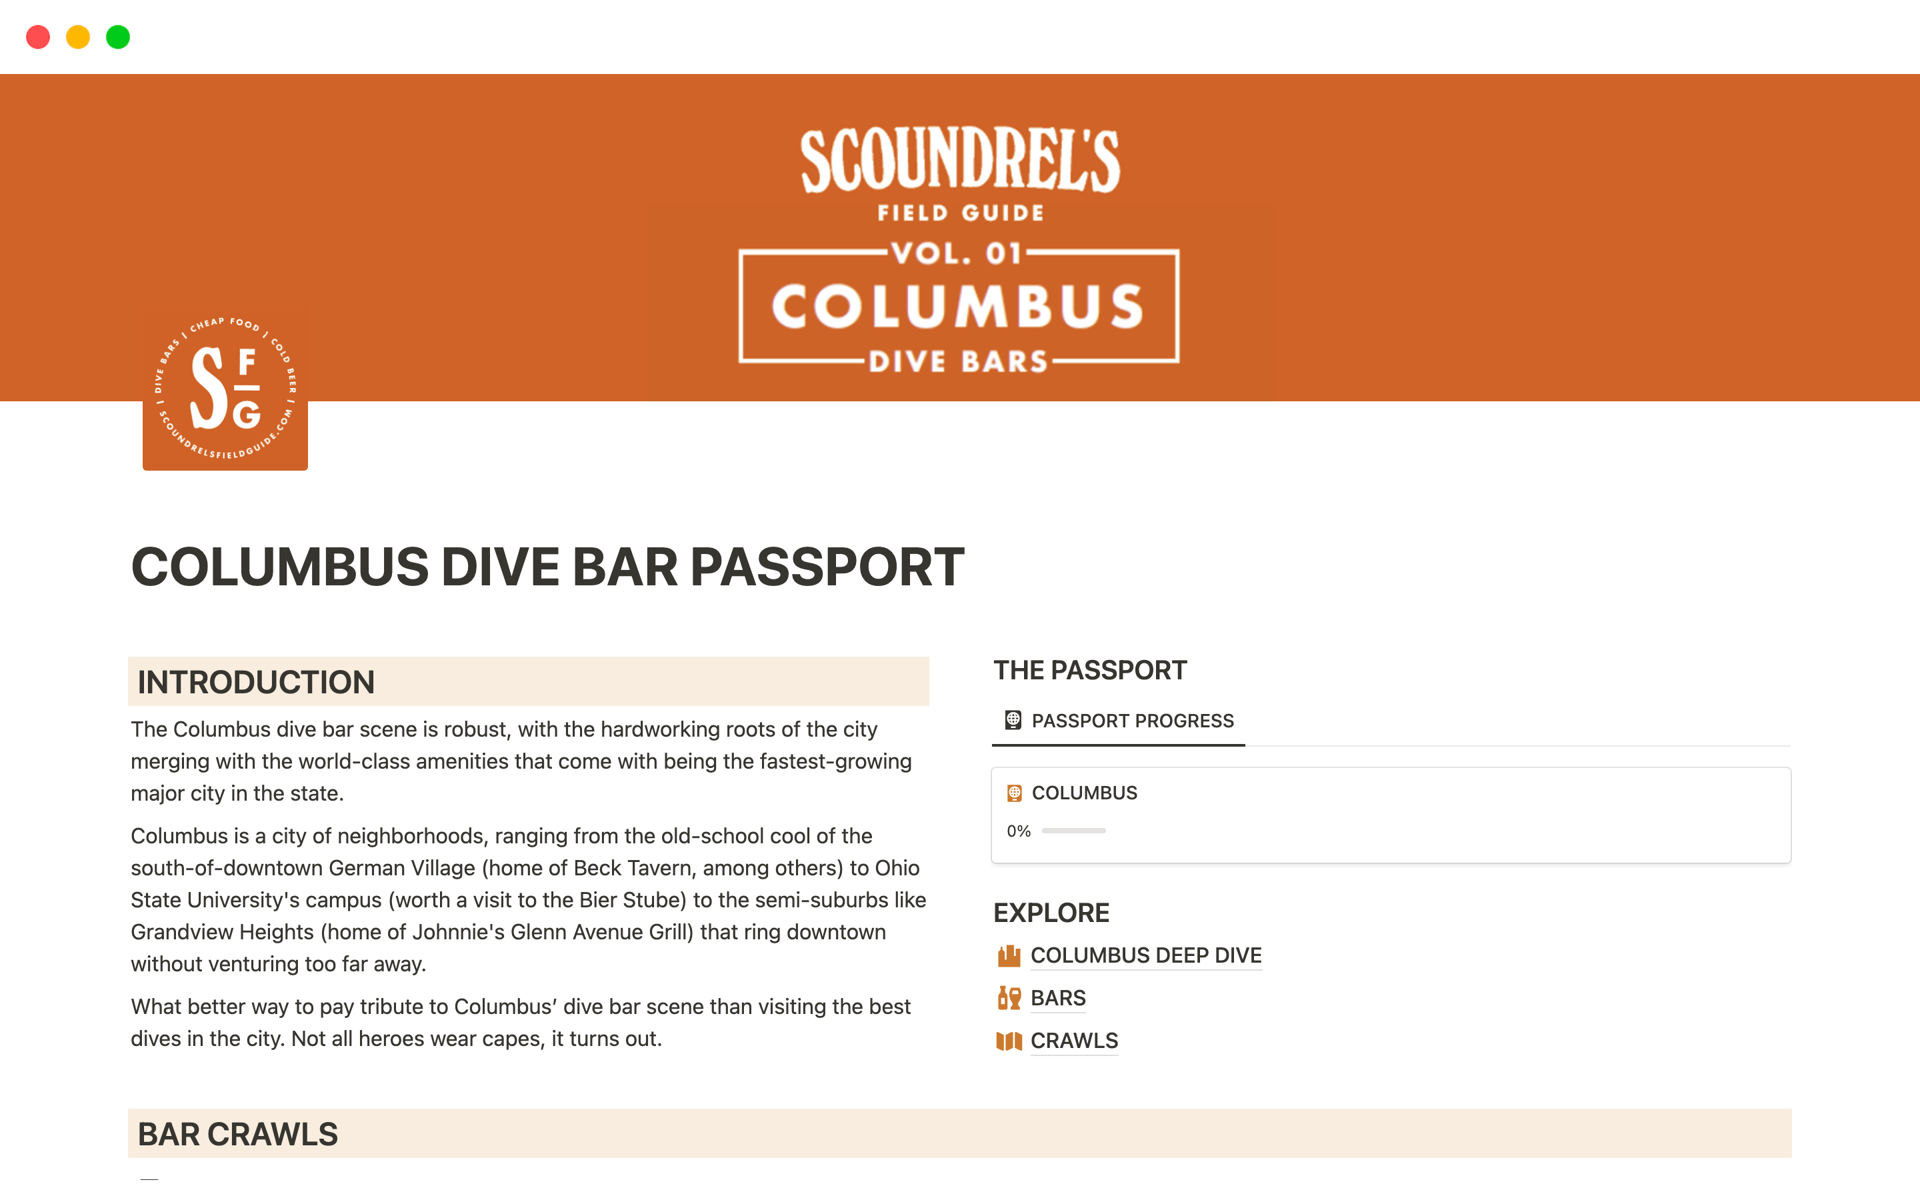 Start your epic journey through Columbus' best dive bars with this passport. This Notion template includes over 30 dive bar recommendations with unique ratings, descriptions, images and more to prep you for your visit.